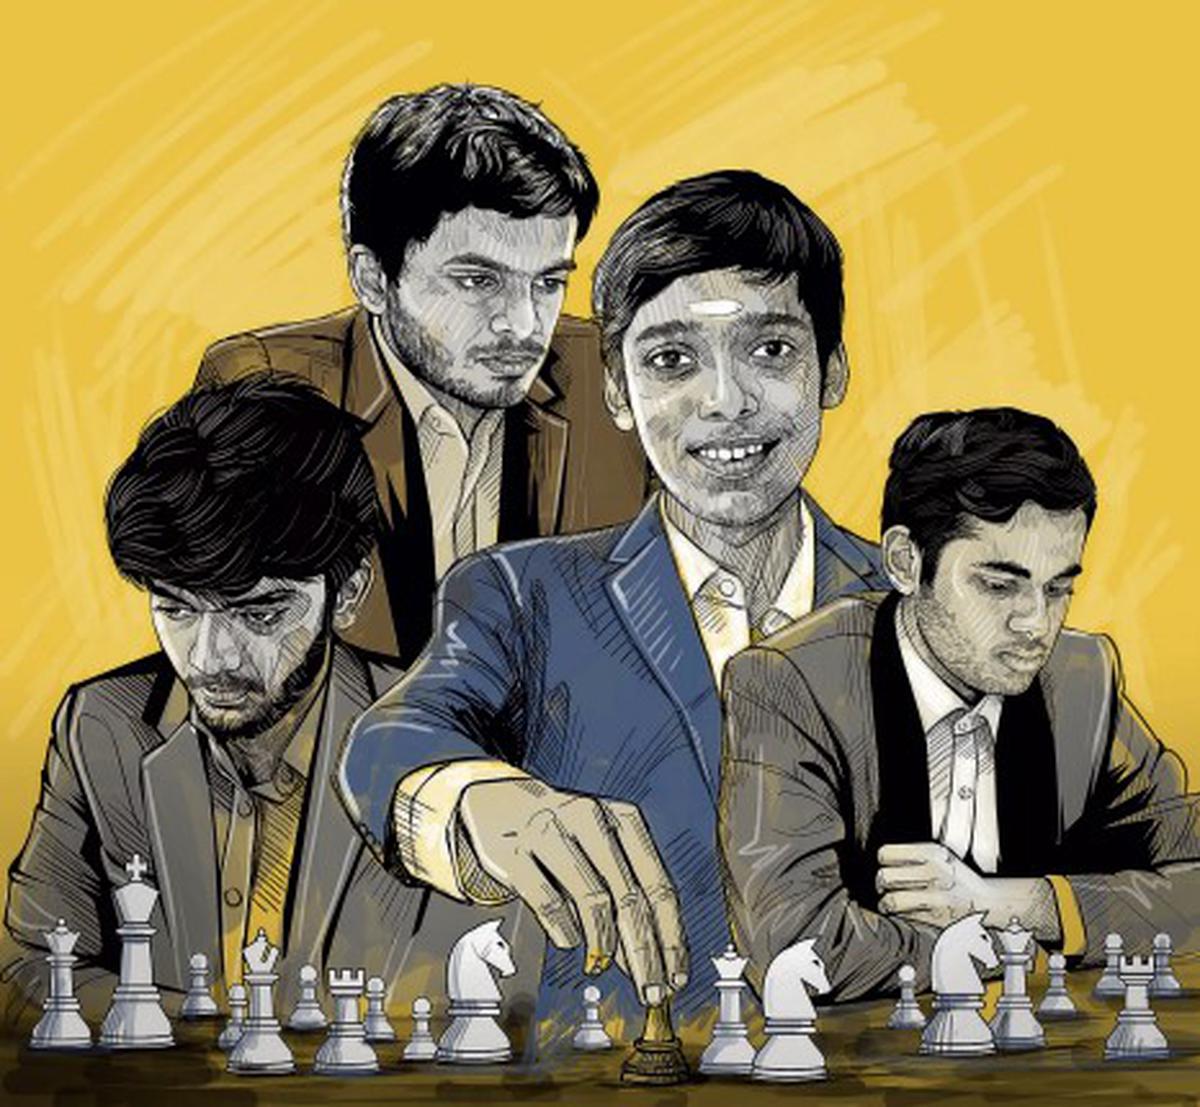 ChessBase India on Instagram: We have 9 players in top 100 in the world of  chess now! They are 1. Anand 2. Gukesh 3. Vidit 4. Arjun 5. Harikrishna 6.  Praggnanandhaa 7.